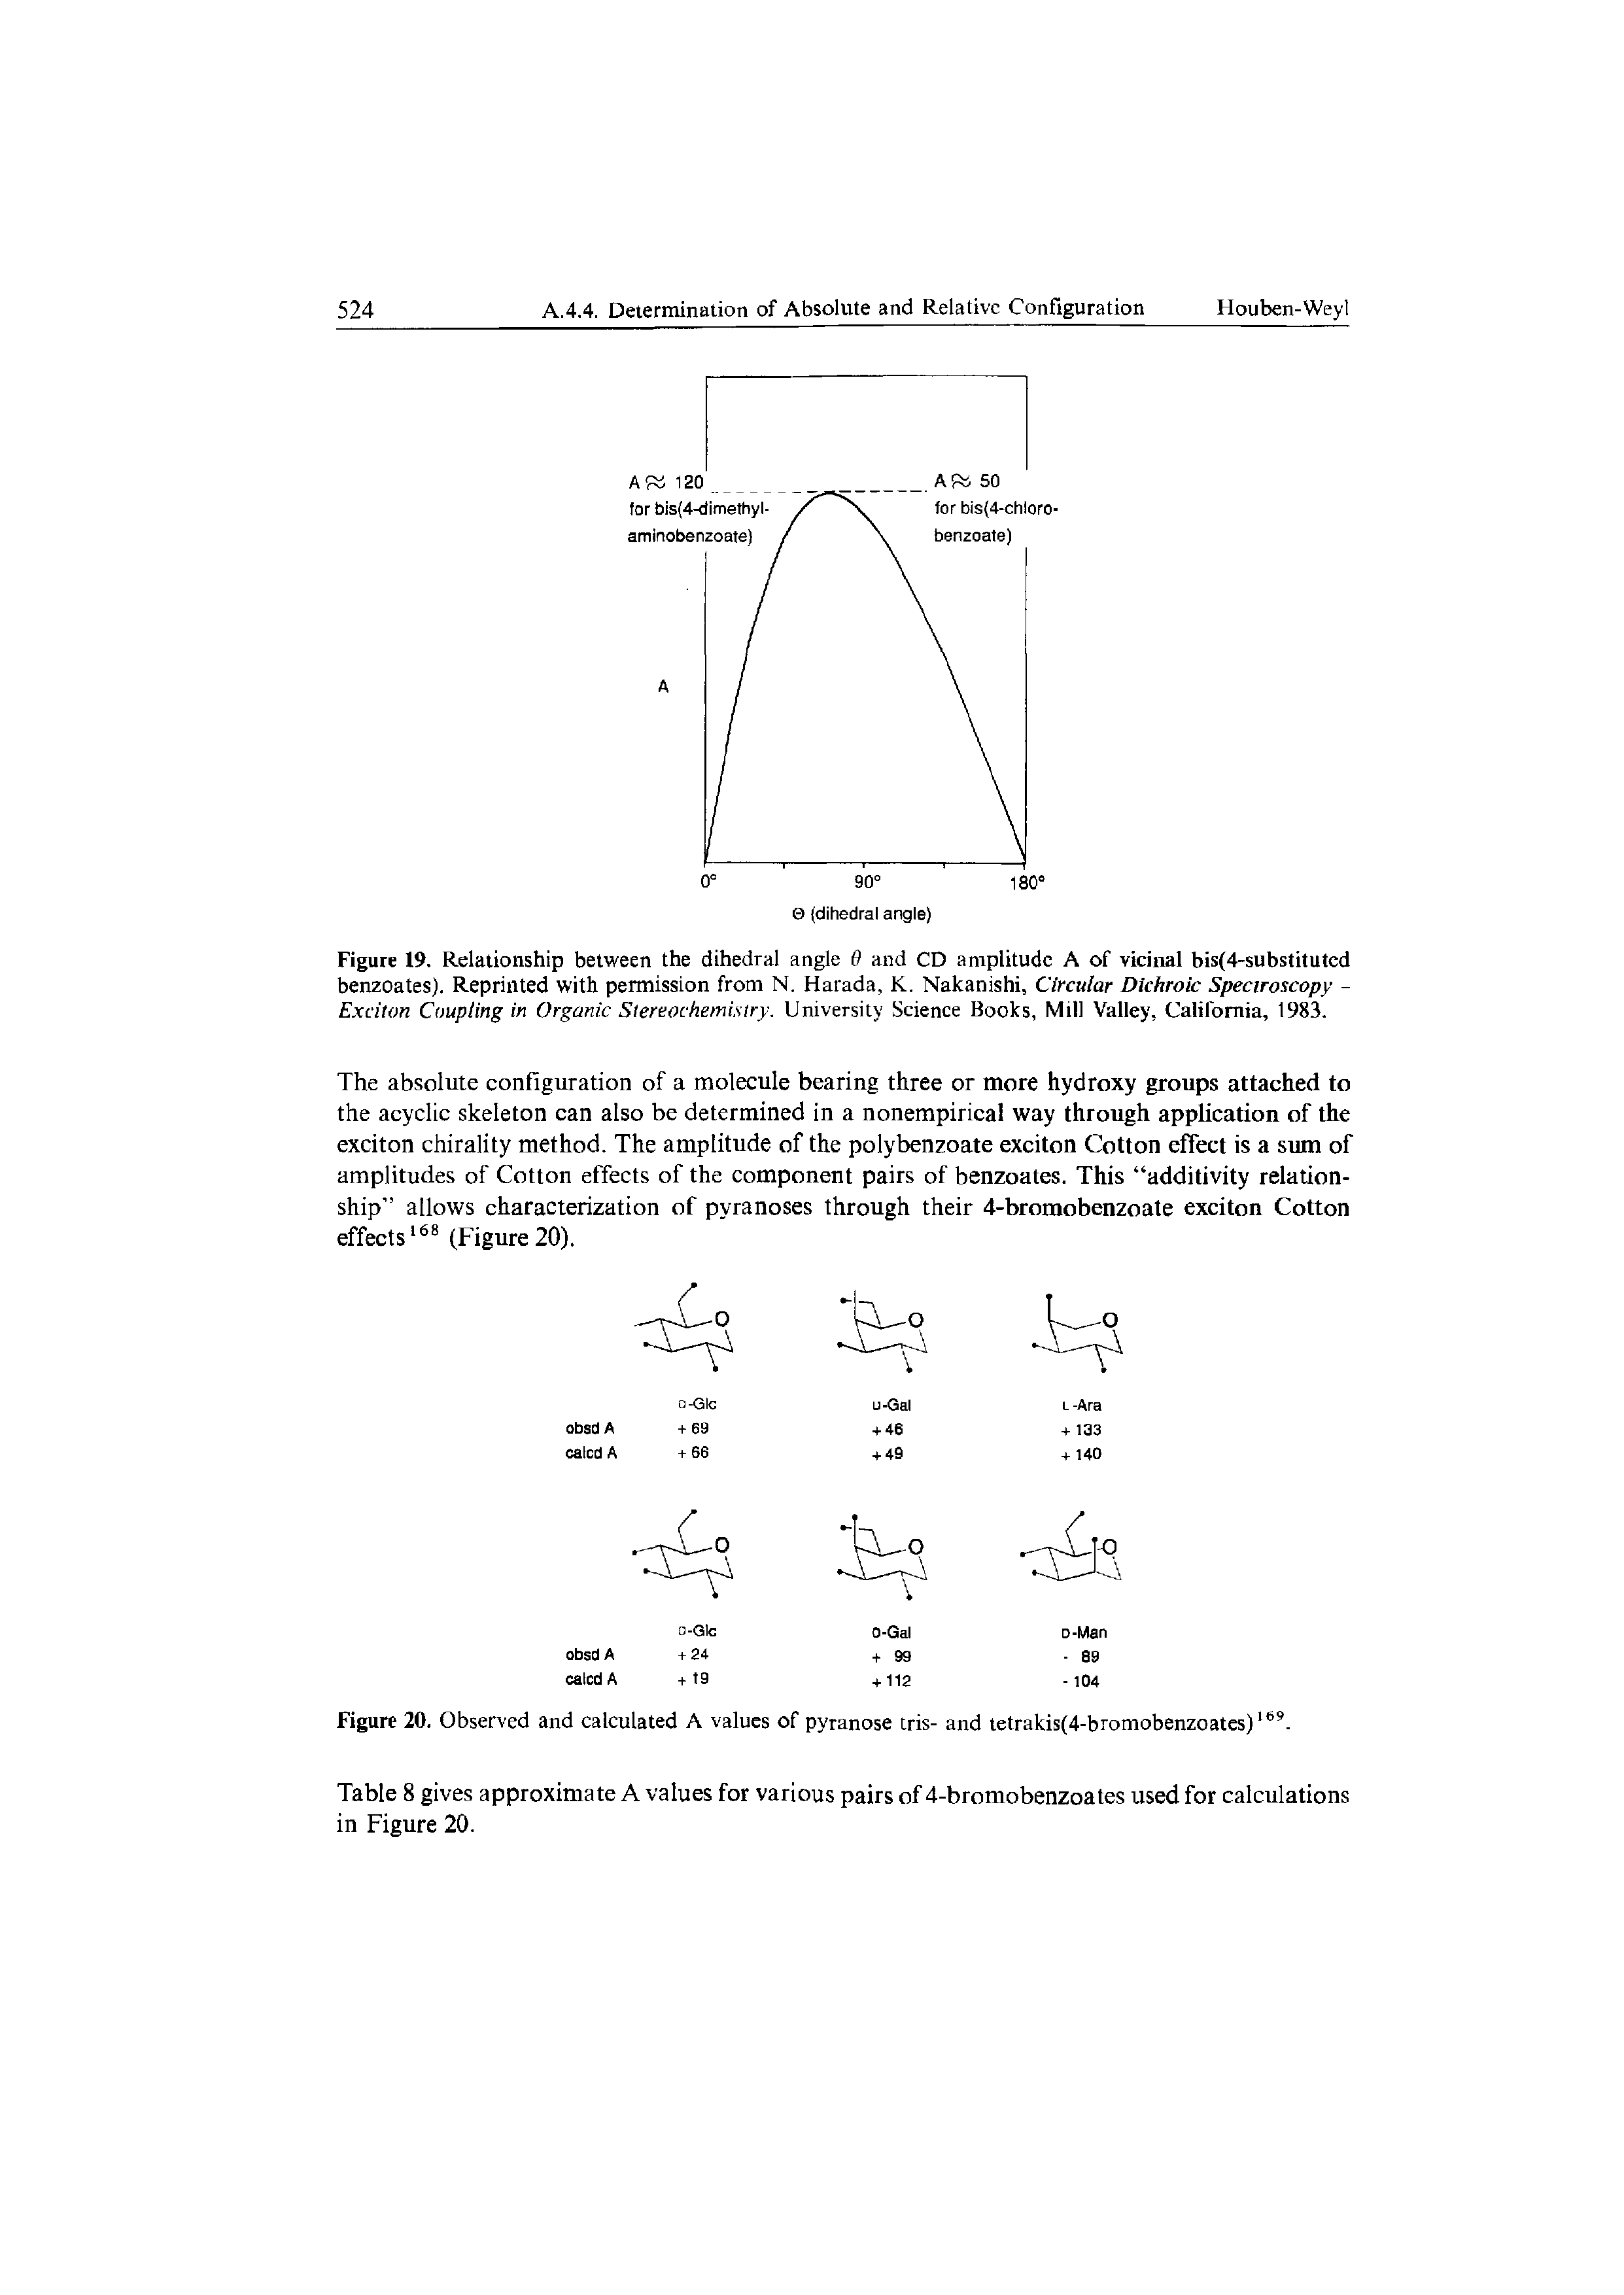 Figure 19. Relationship between the dihedral angle 0 and CD amplitude A of vicinal bis(4-substitutcd benzoates). Reprinted with permission from N. Harada, K. Nakanishi, Circular Dichroic Spectroscopy -Exciton Coupling in Organic Stereochemistry. University Science Books, Mill Valley, California, 1983.